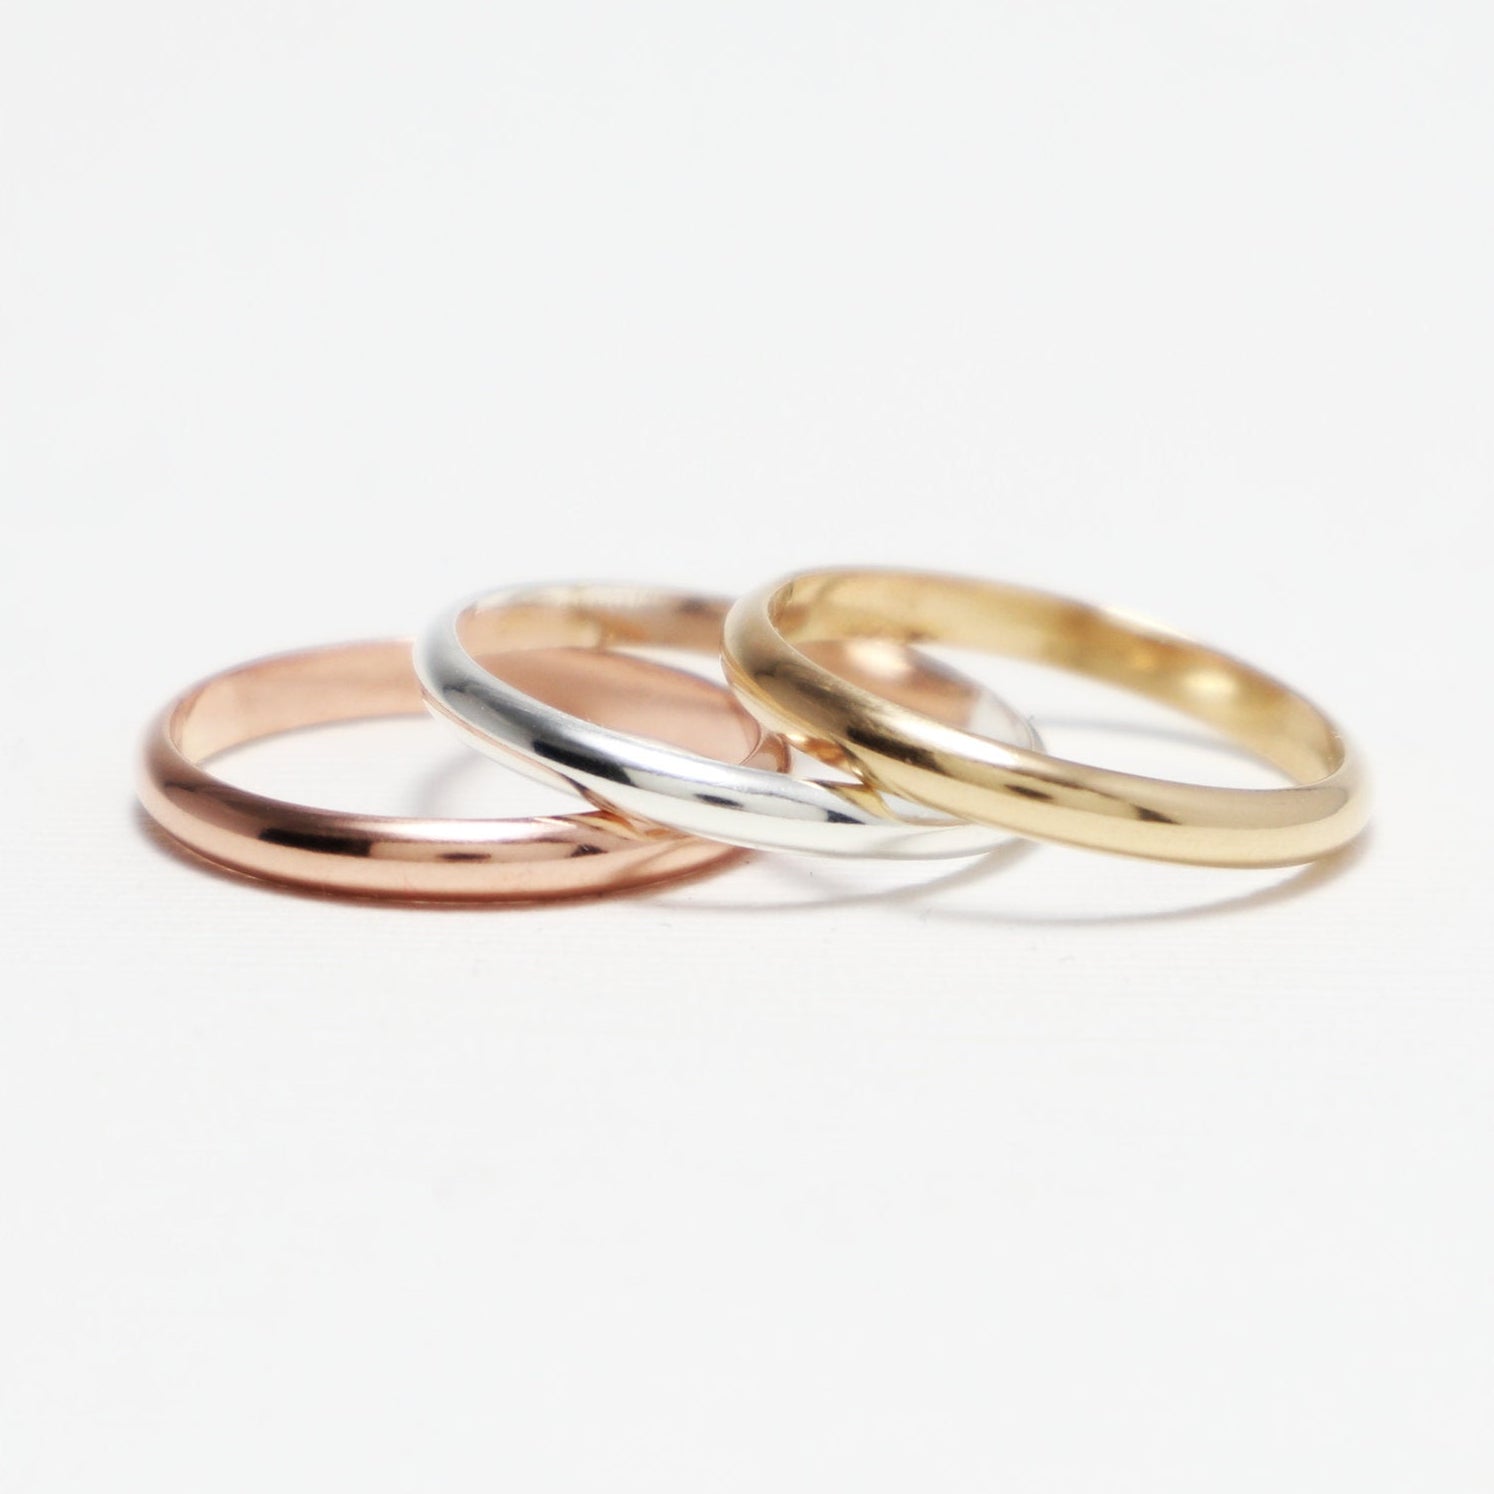 The 3 Comfort Rings